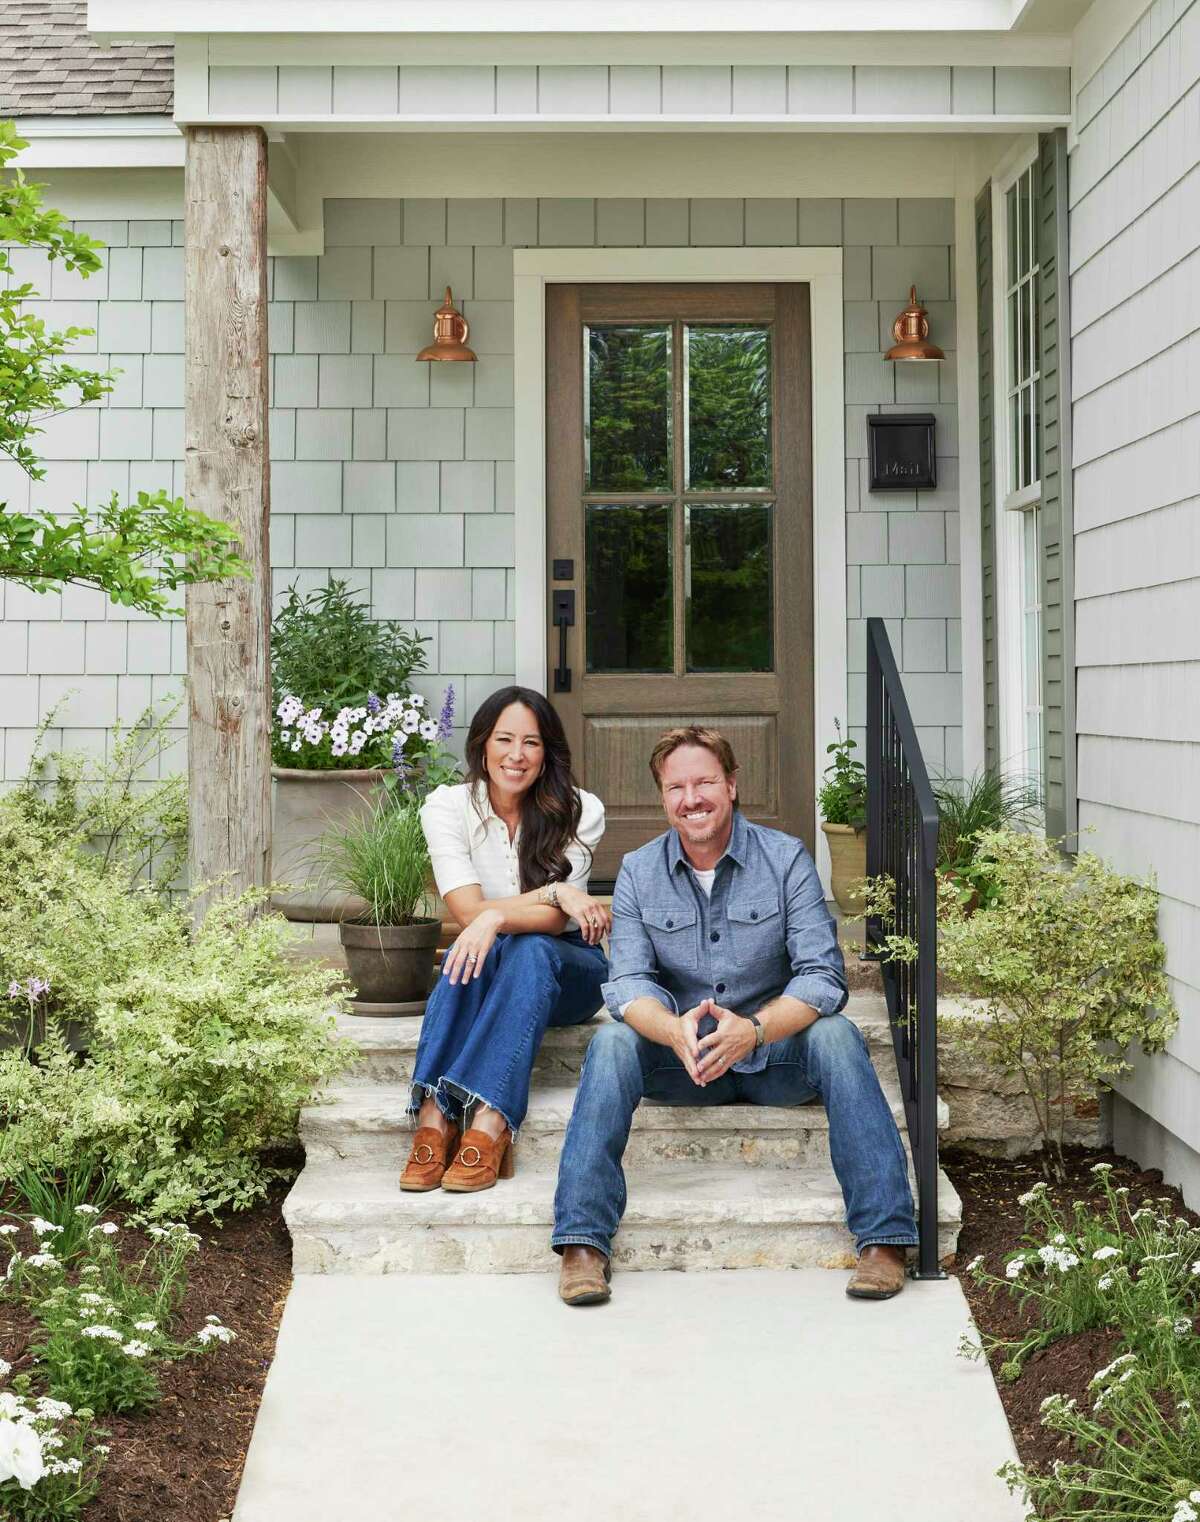 HGTV stars Chip and Joanna Gaines are launching siding collection